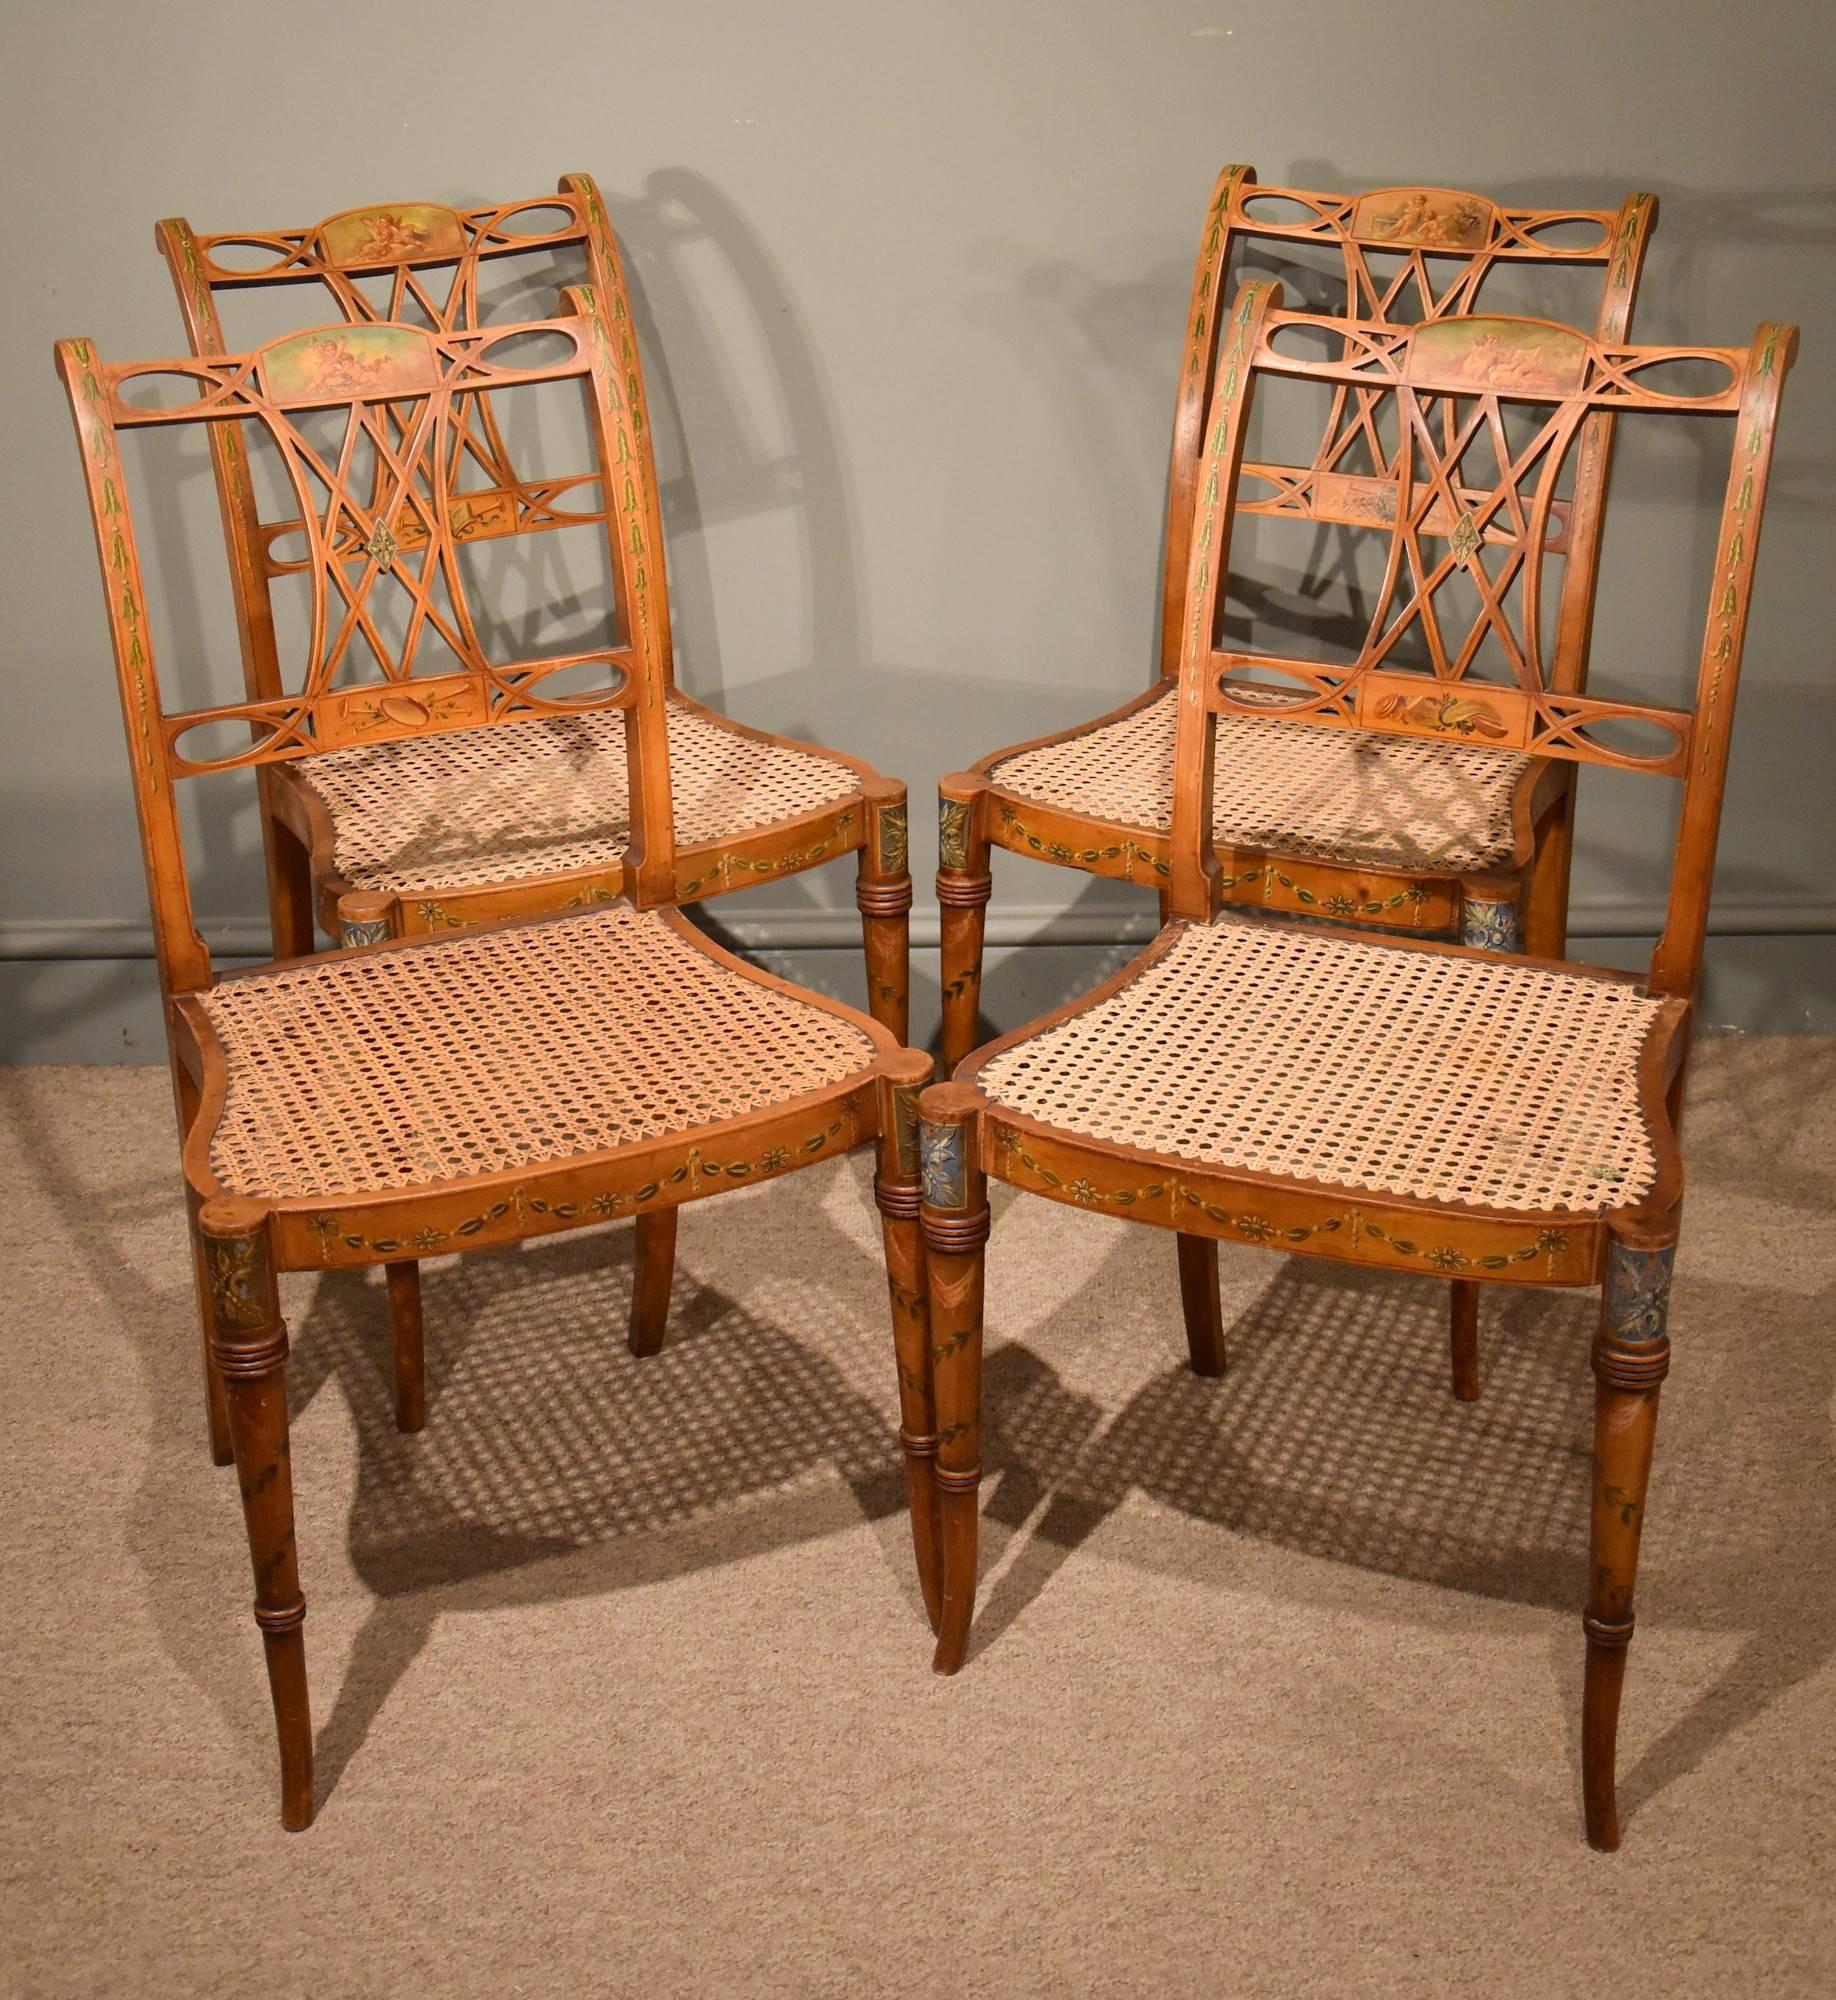 Late 19th century set of four satinwood hand-painted chairs in the style of Edwards and Roberts

Dimensions 
Height 33.5